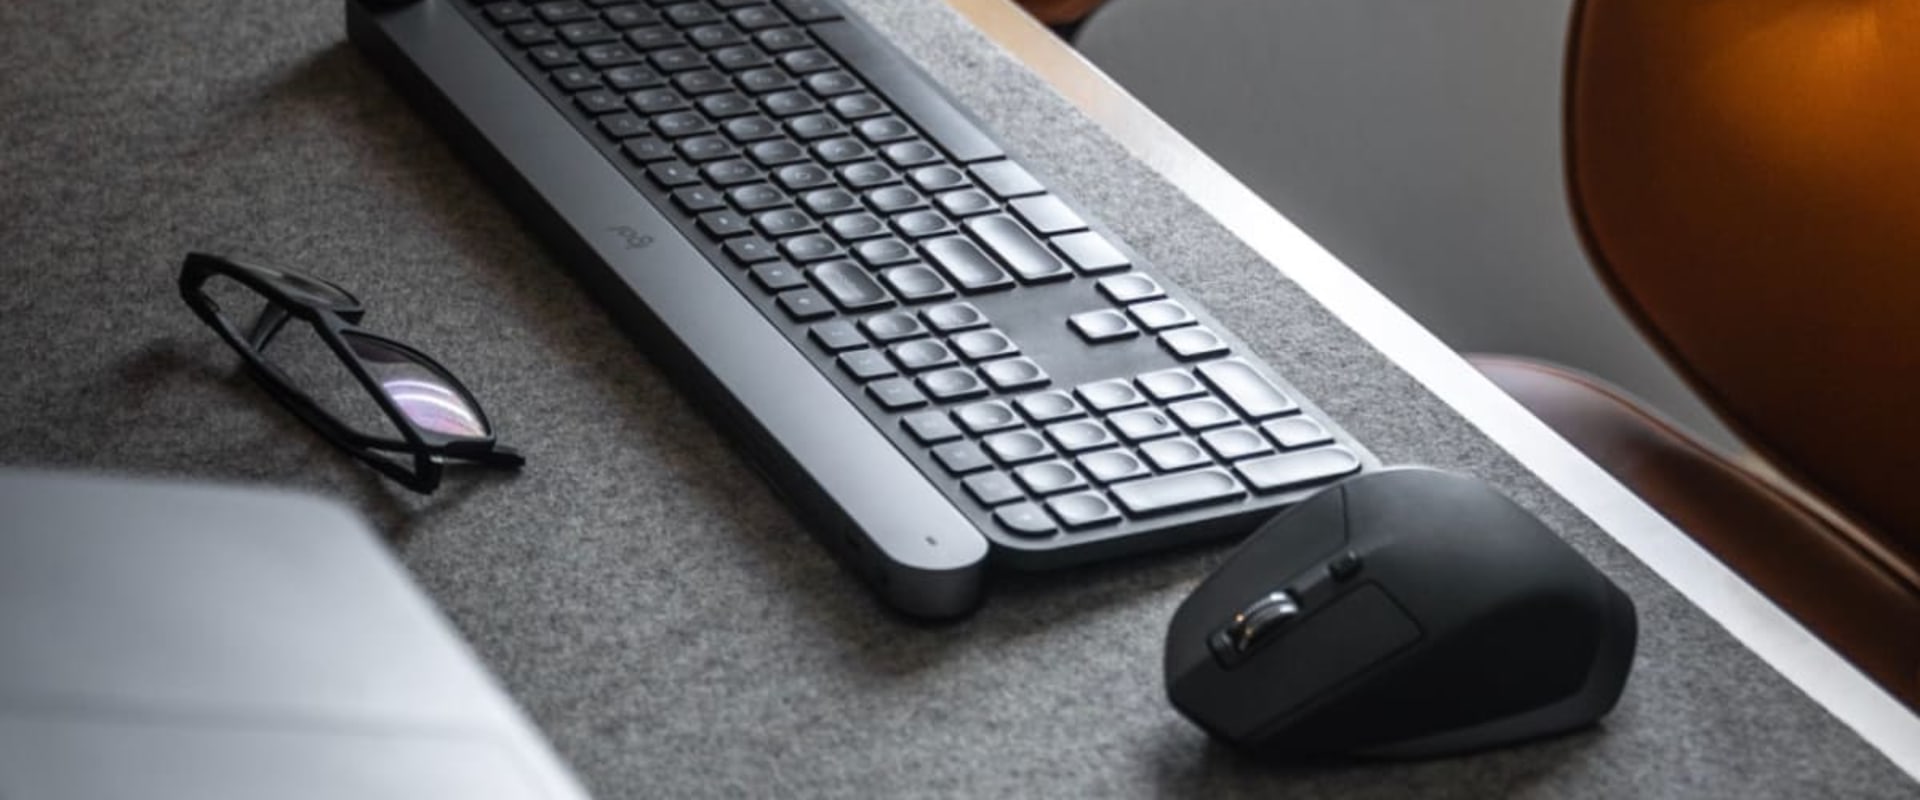 The Best Keyboard and Mouse Options for Seniors